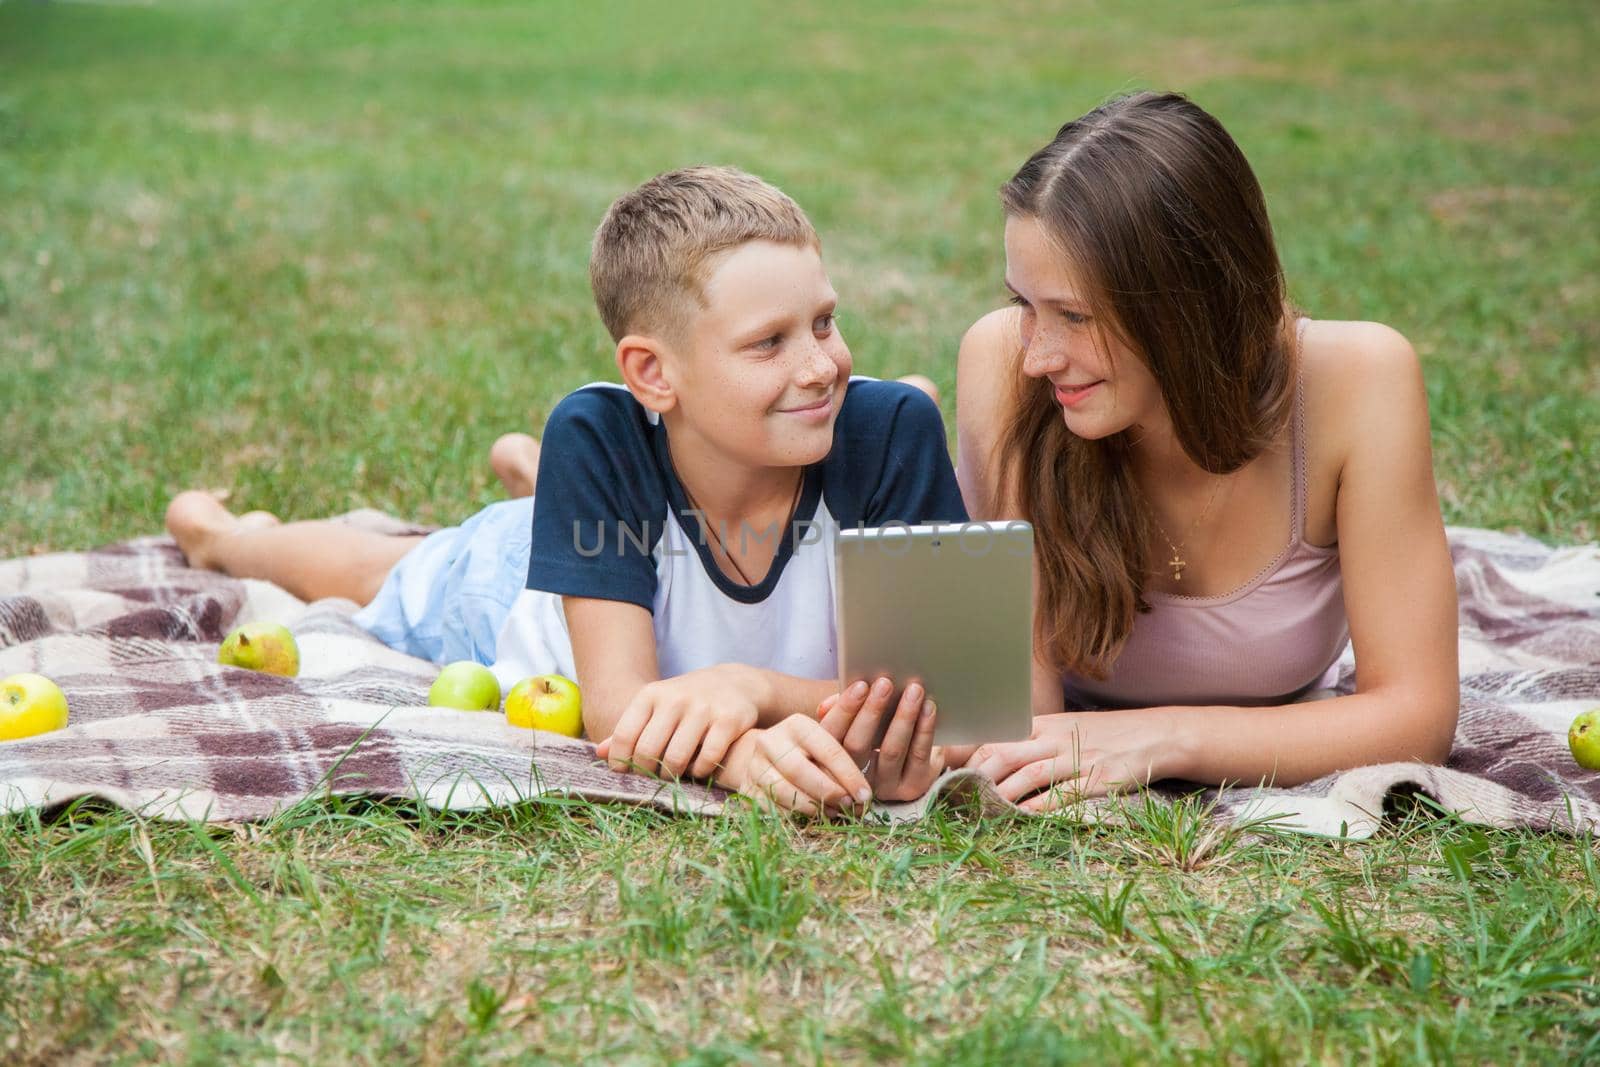 Young sister and brother with freckles on their faces lying down on plaid and using tablet in park. looking to each other and smiling.